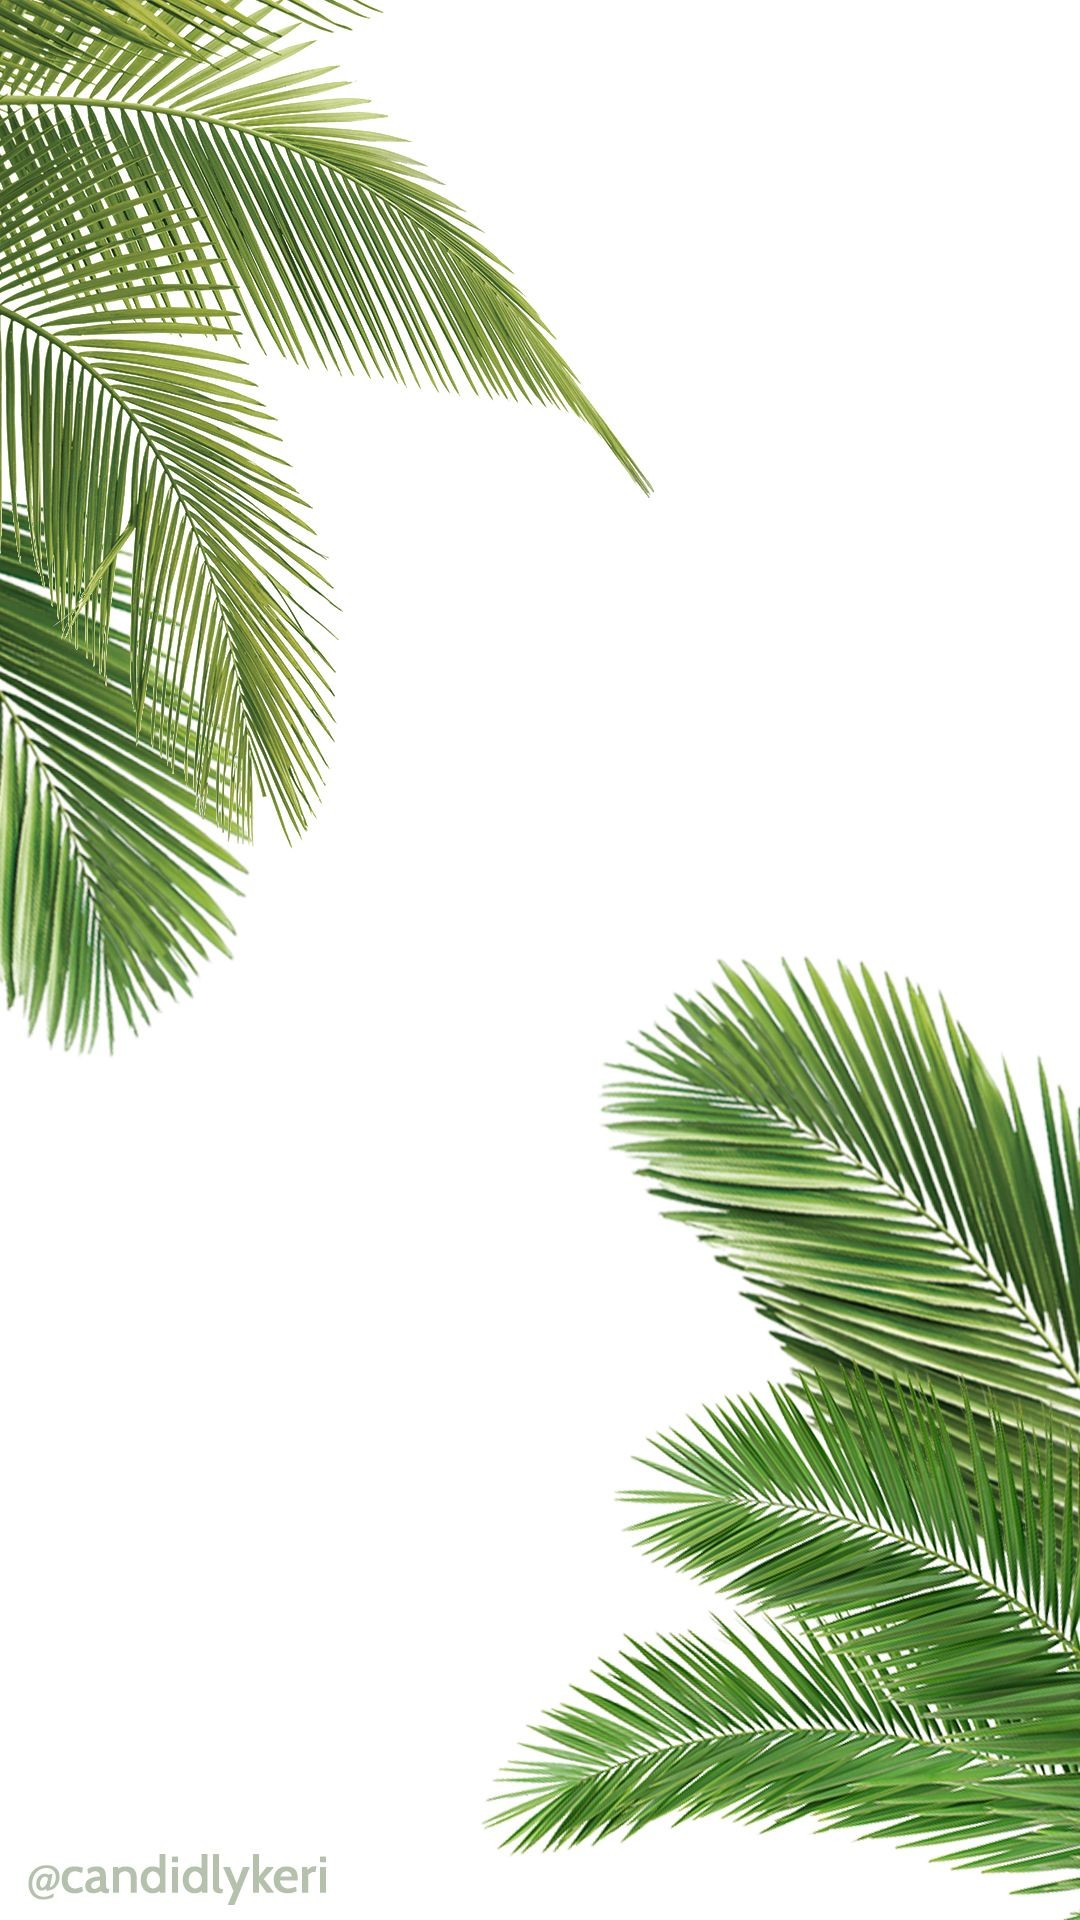 1080x1920 Palm tree and white wallpaper free download for iPhone android or desktop  background on the blog!